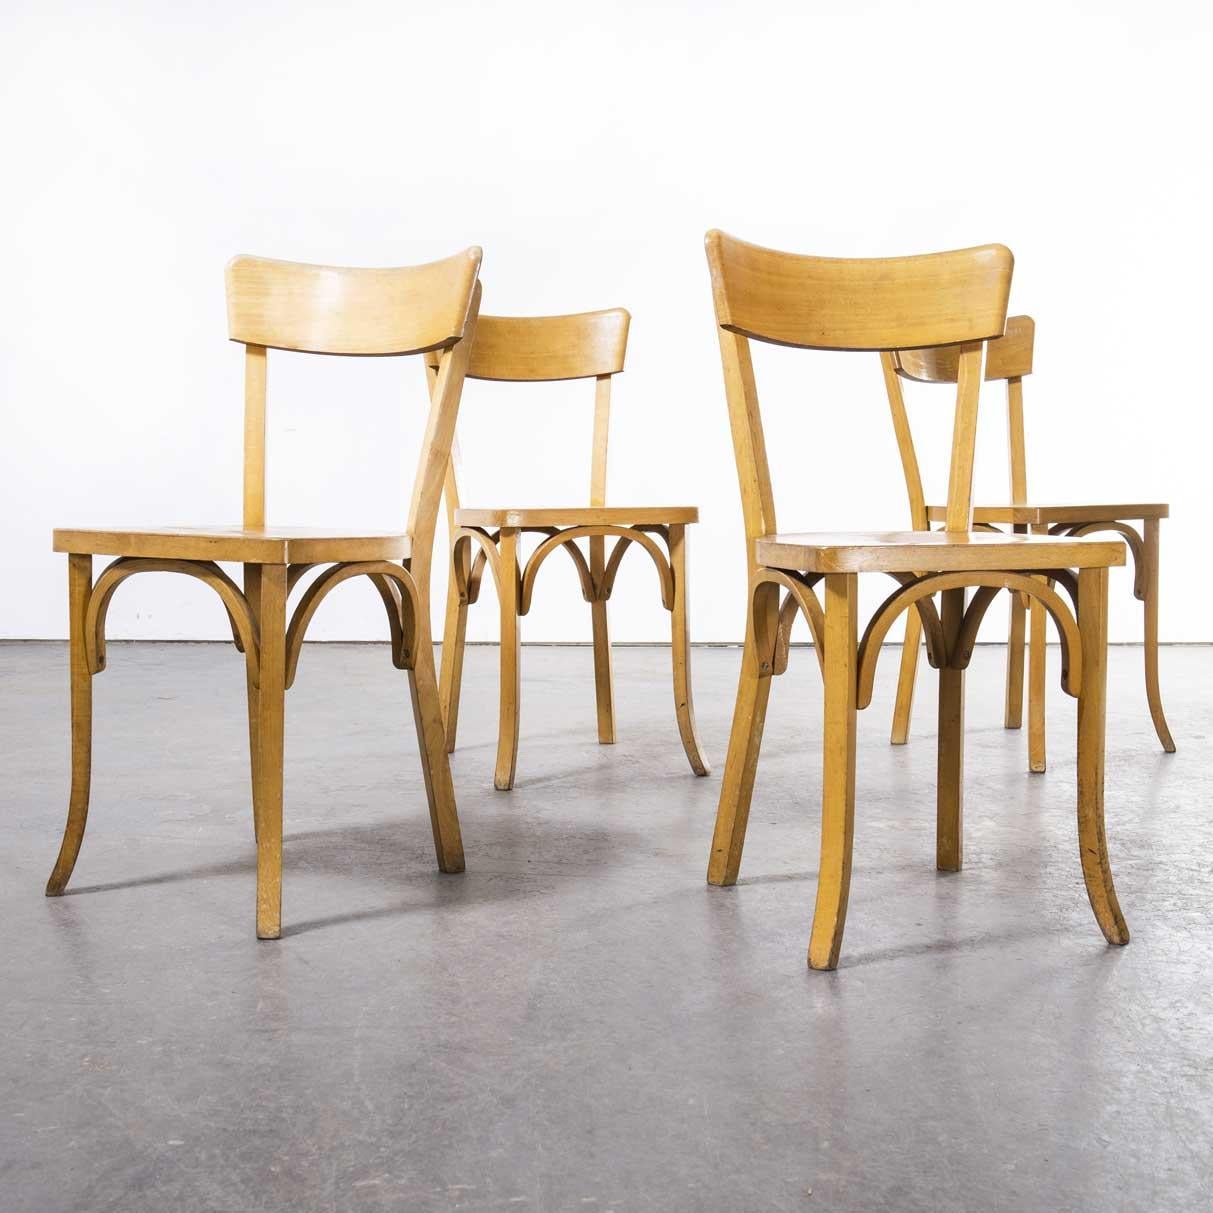 1960’s Luterma blonde beech bentwood dining chairs – set of four
1960’s Luterma blonde beech bentwood dining chairs – set of four. The process of steam bending beech to create elegant chairs was discovered and developed by Thonet, but when its